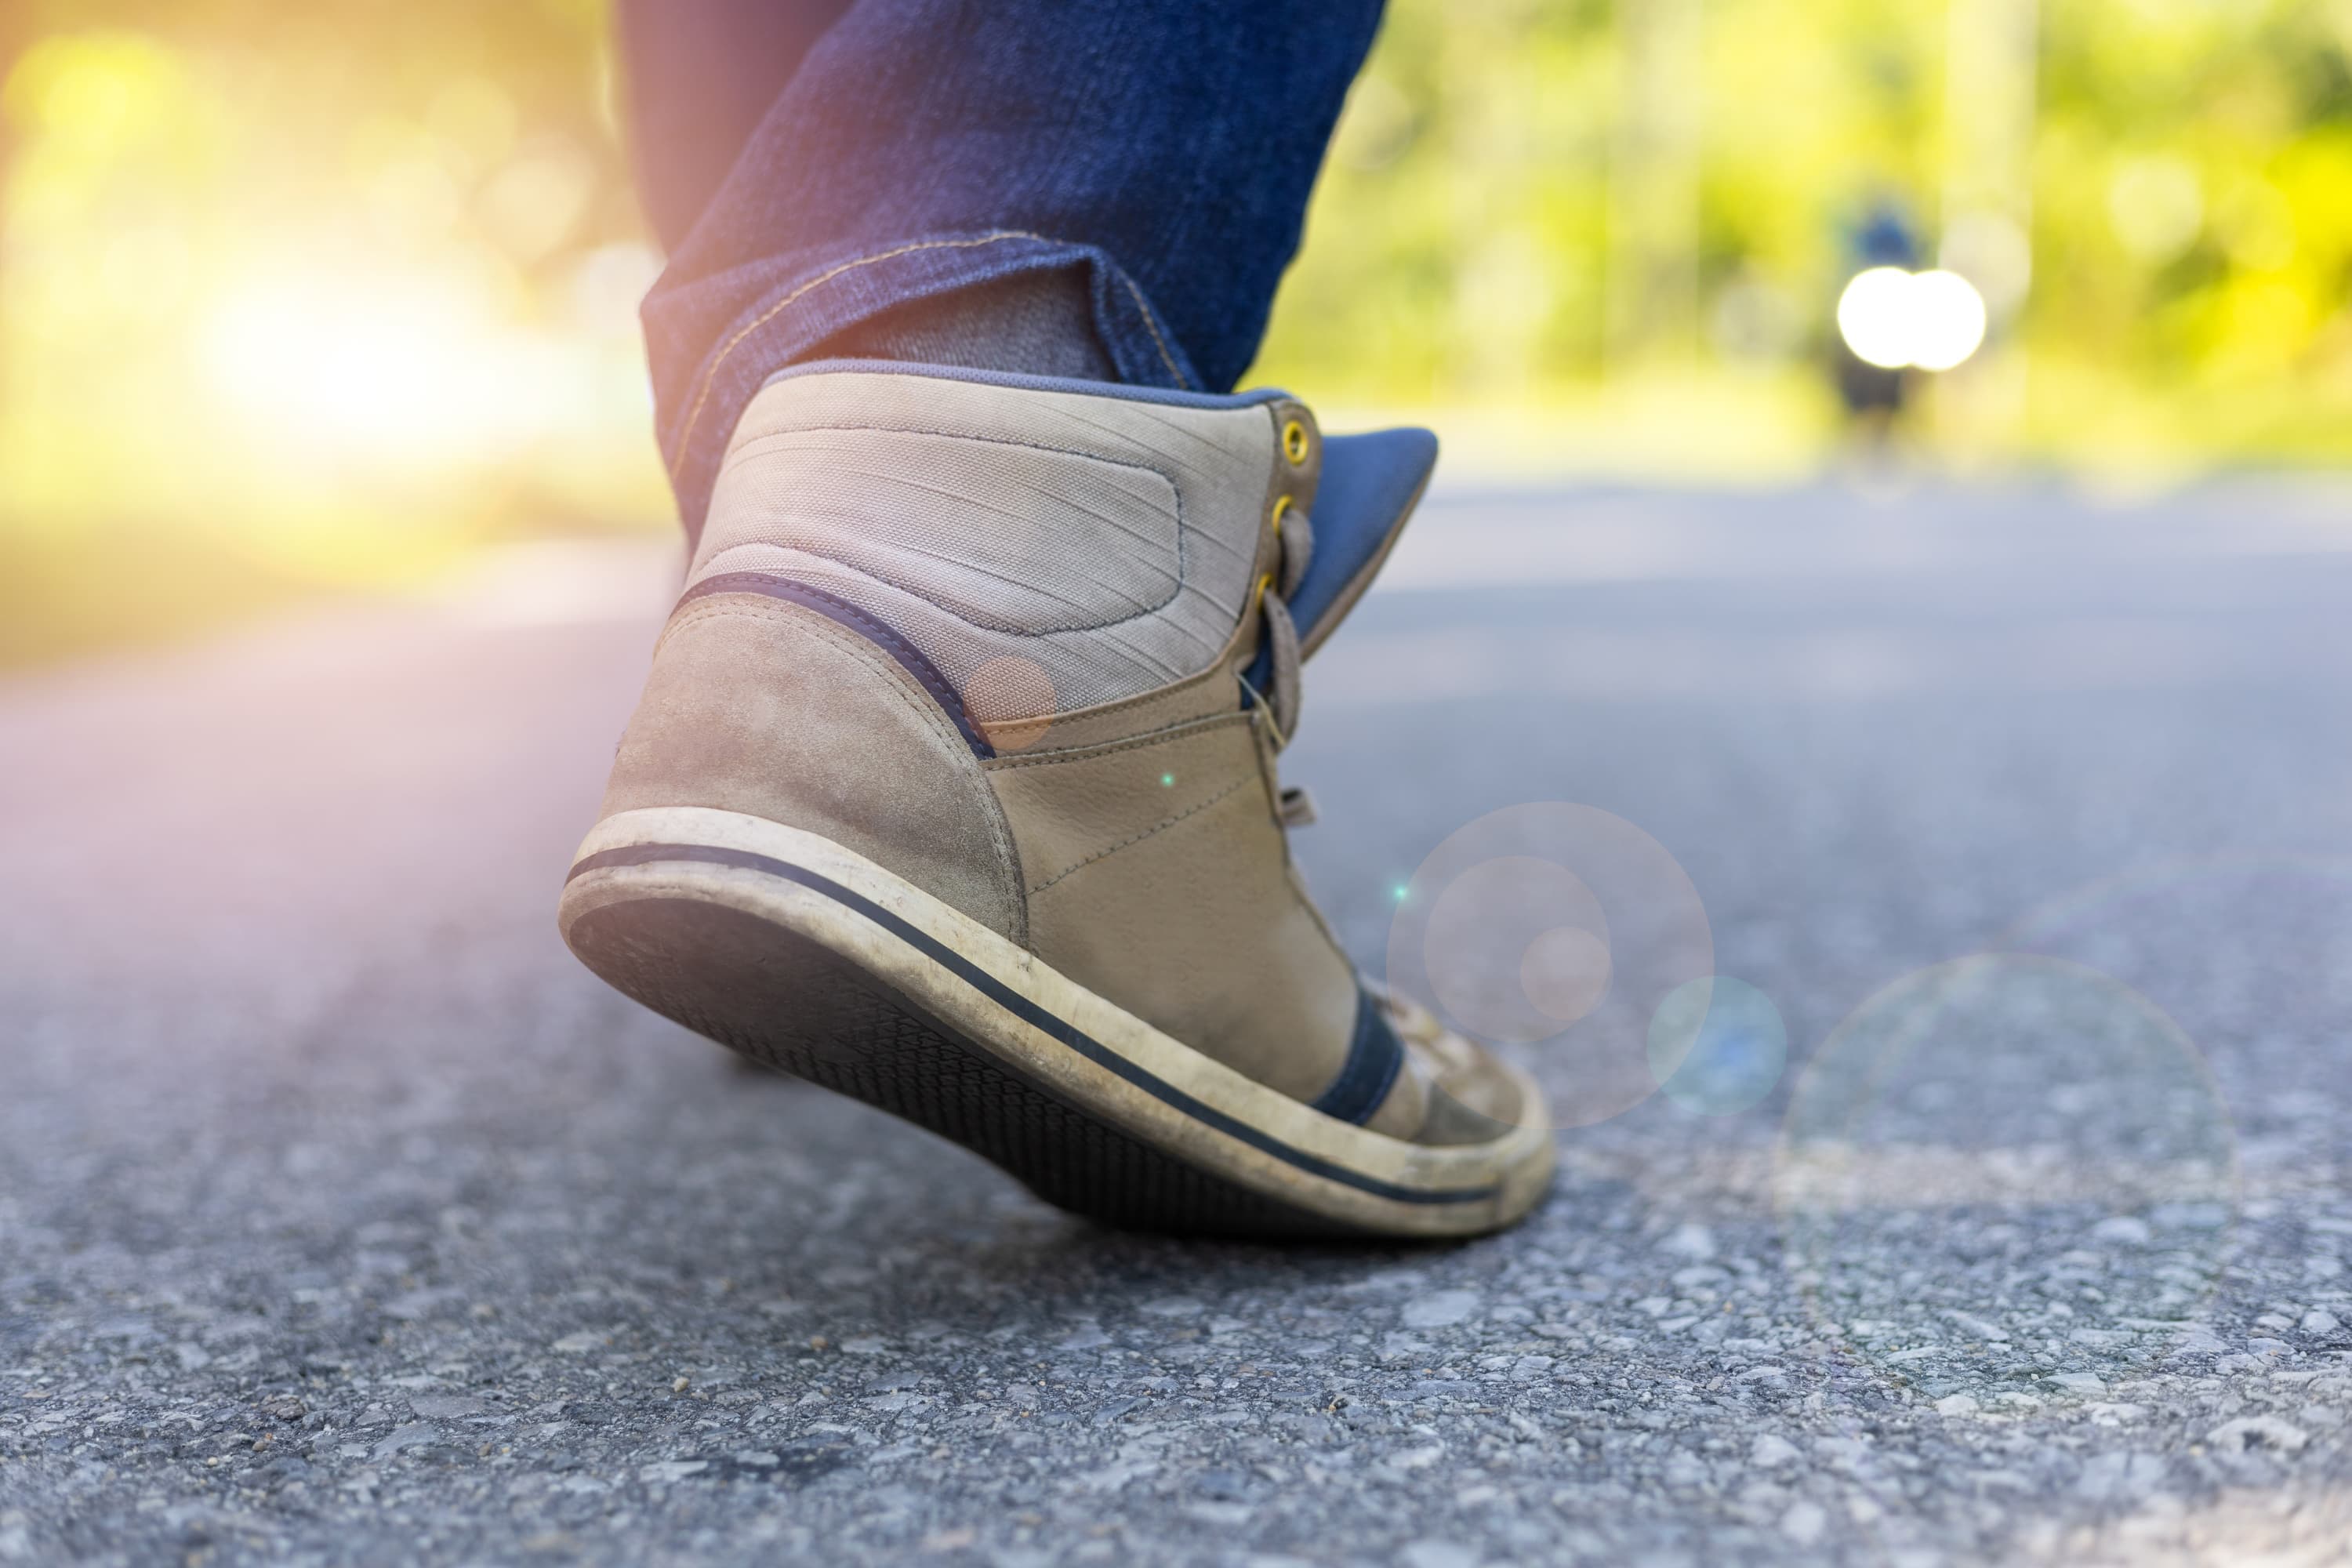 Neutramotion Slim Insoles are thin insoles developed specially for use in sneaker-type shoes. This insole can be used for commuting to work or school as it reduces foot fatigue and promotes posture correction.